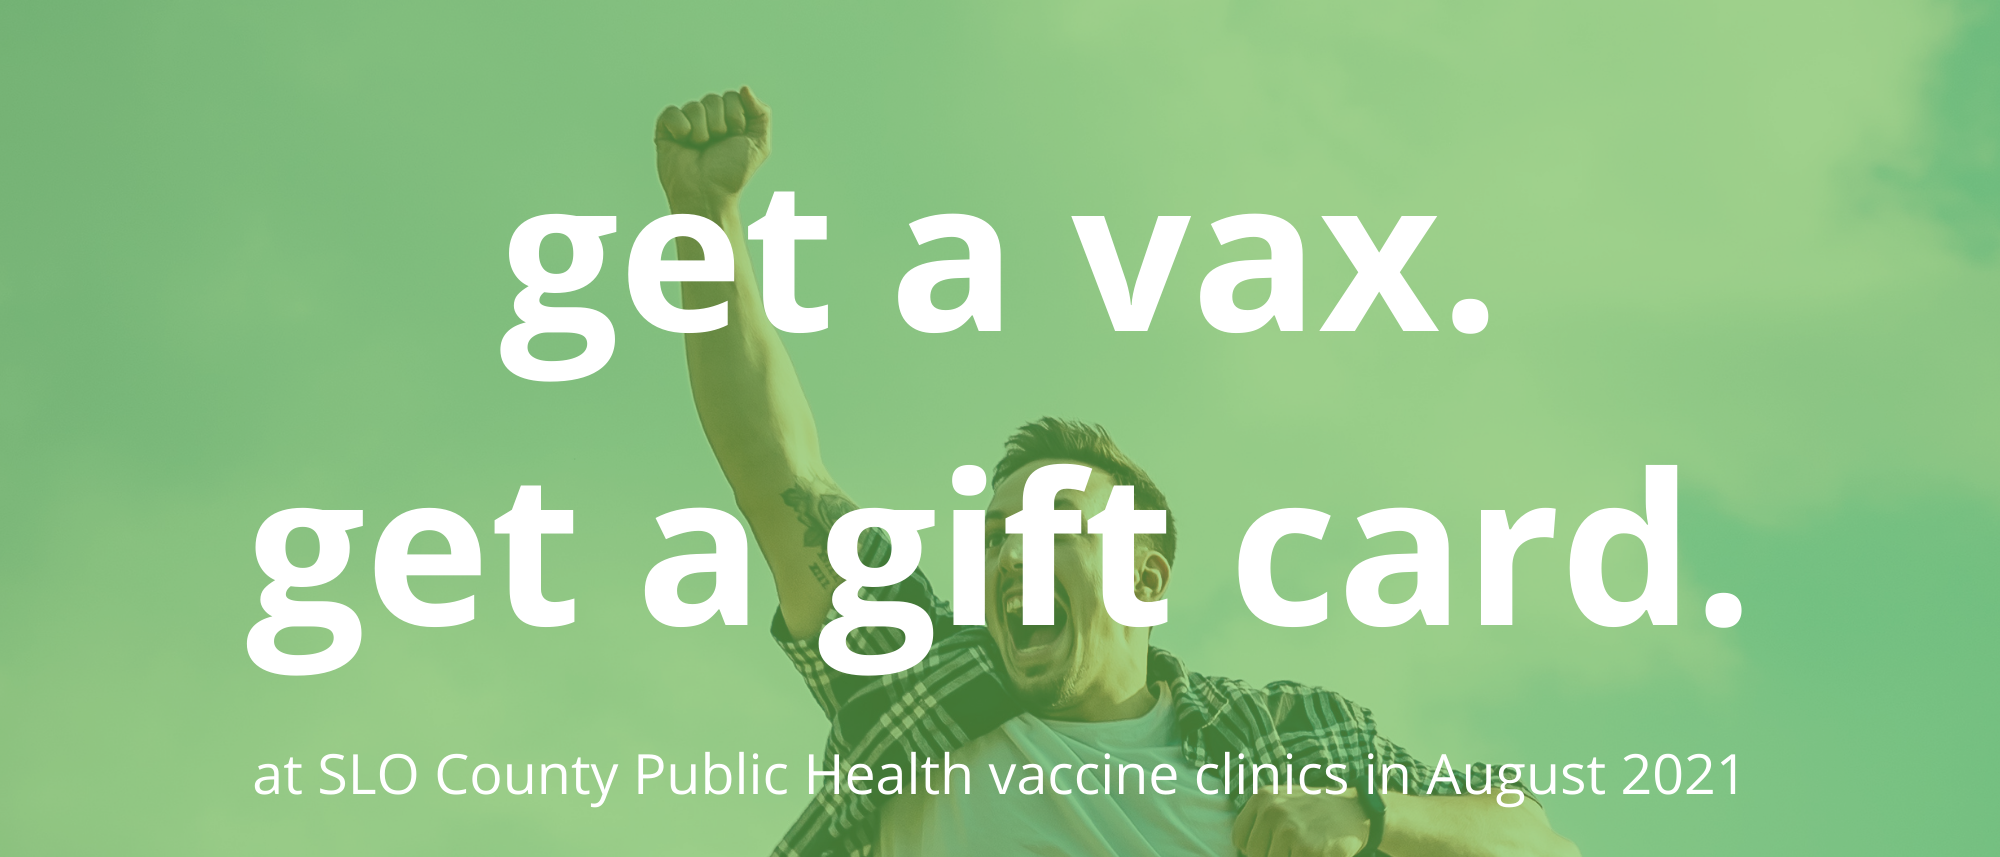 white male raising his fist and cheering. With a text overlay that says "Get a vax, get a gift card at SLO County Public Health vaccine clinics.